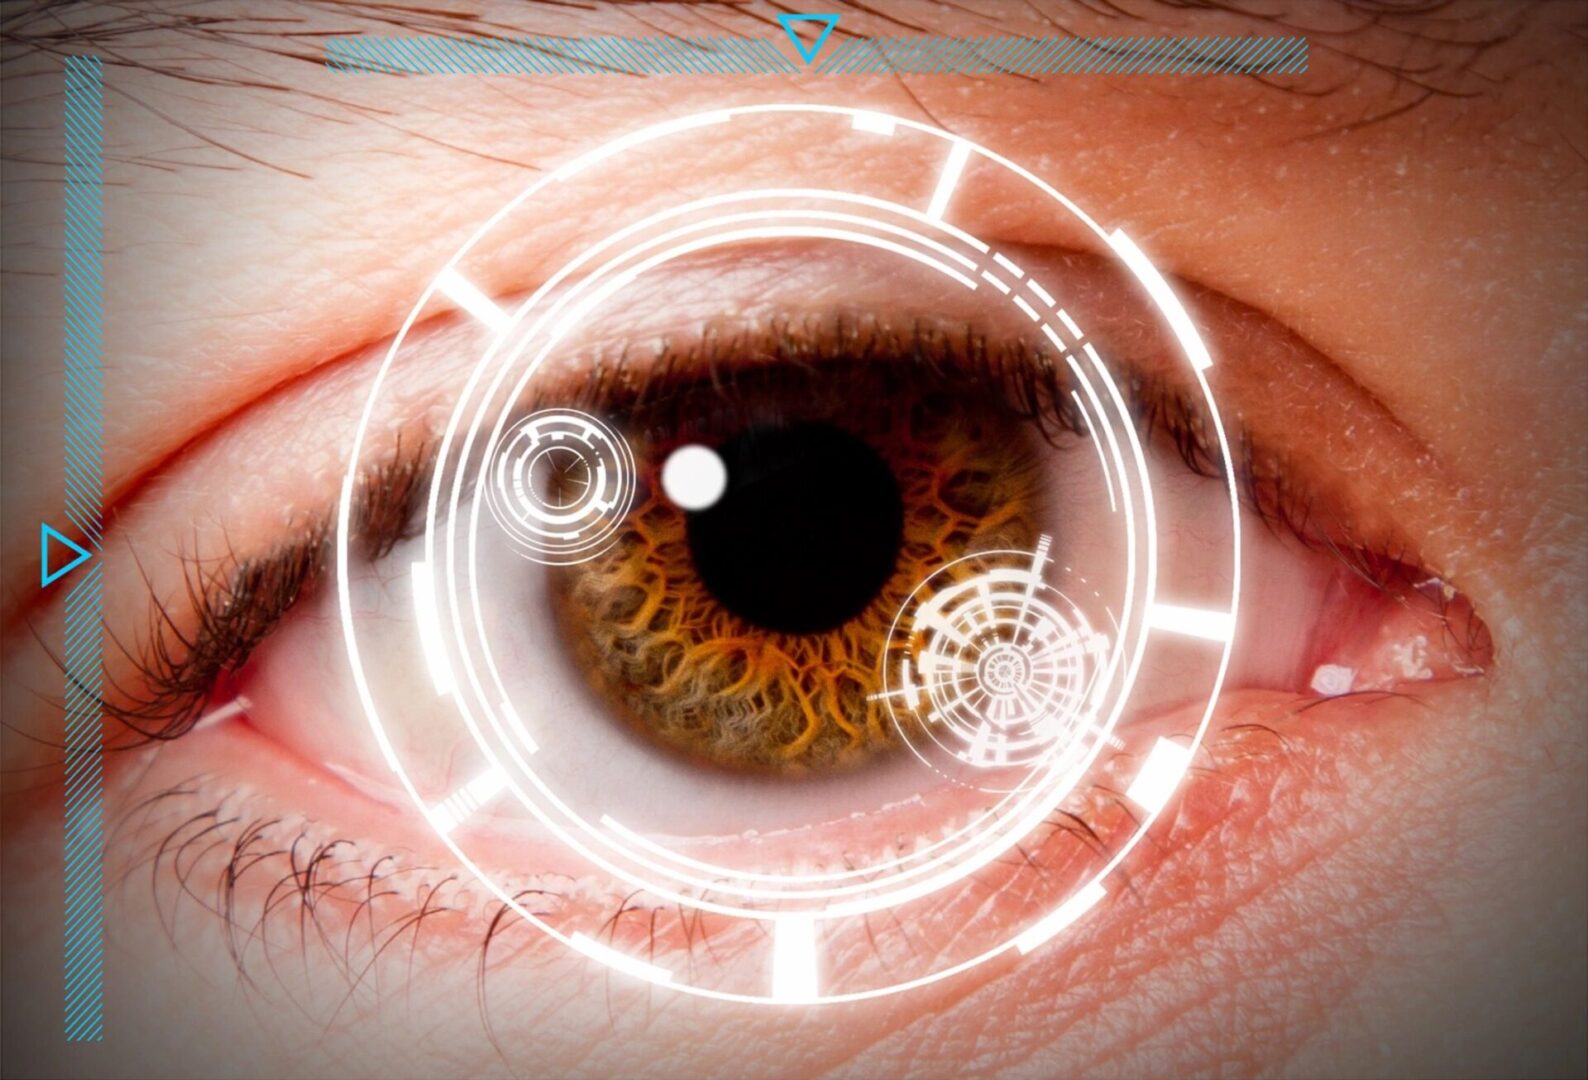 A close up of an eye with a futuristic display